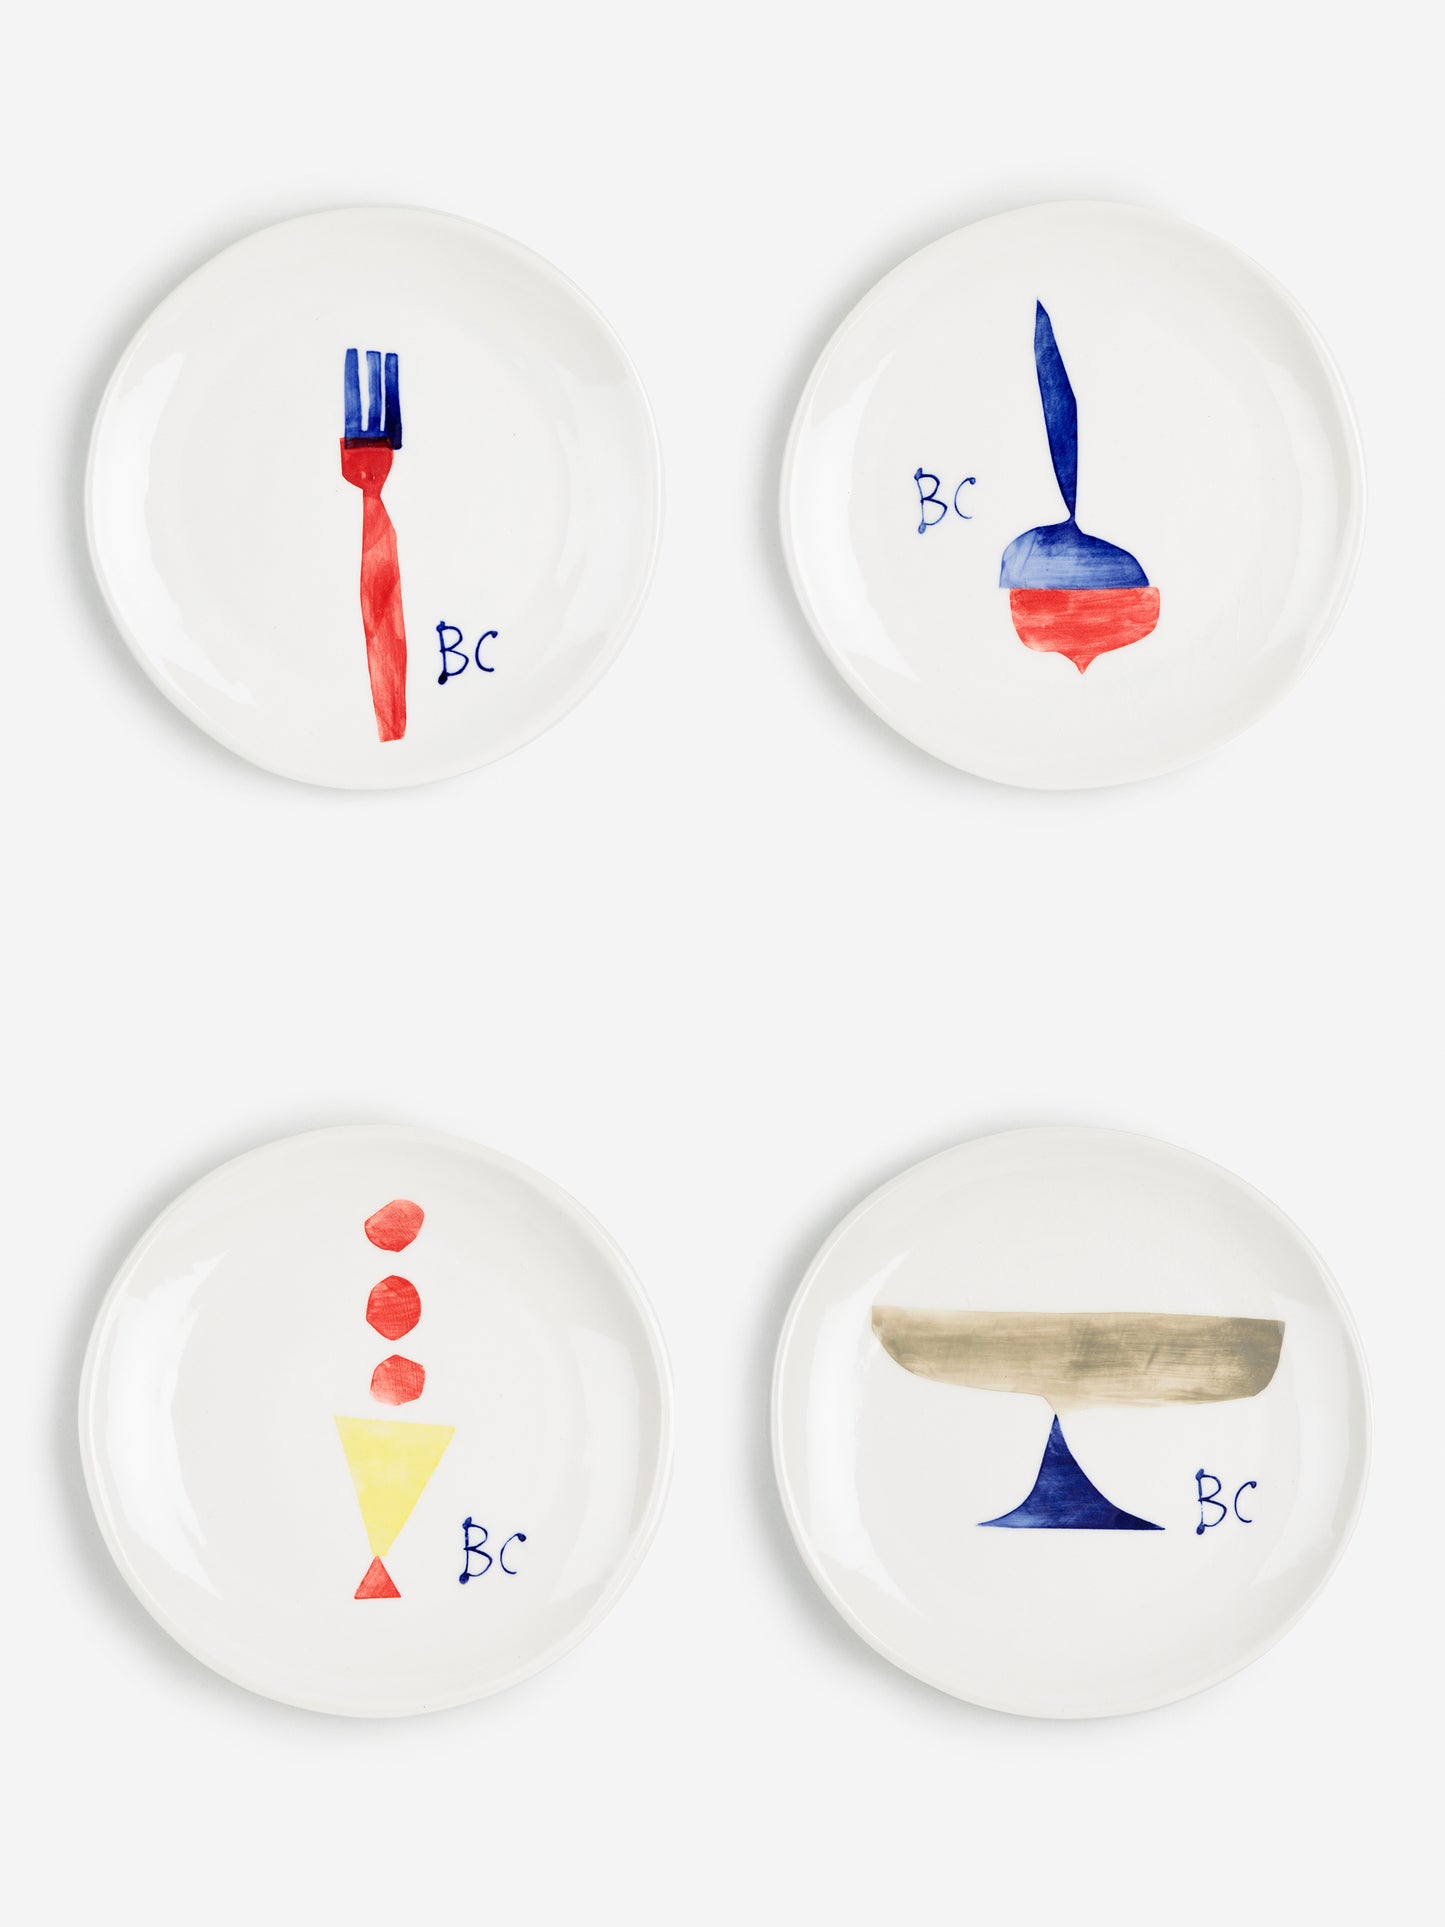 The feast plates